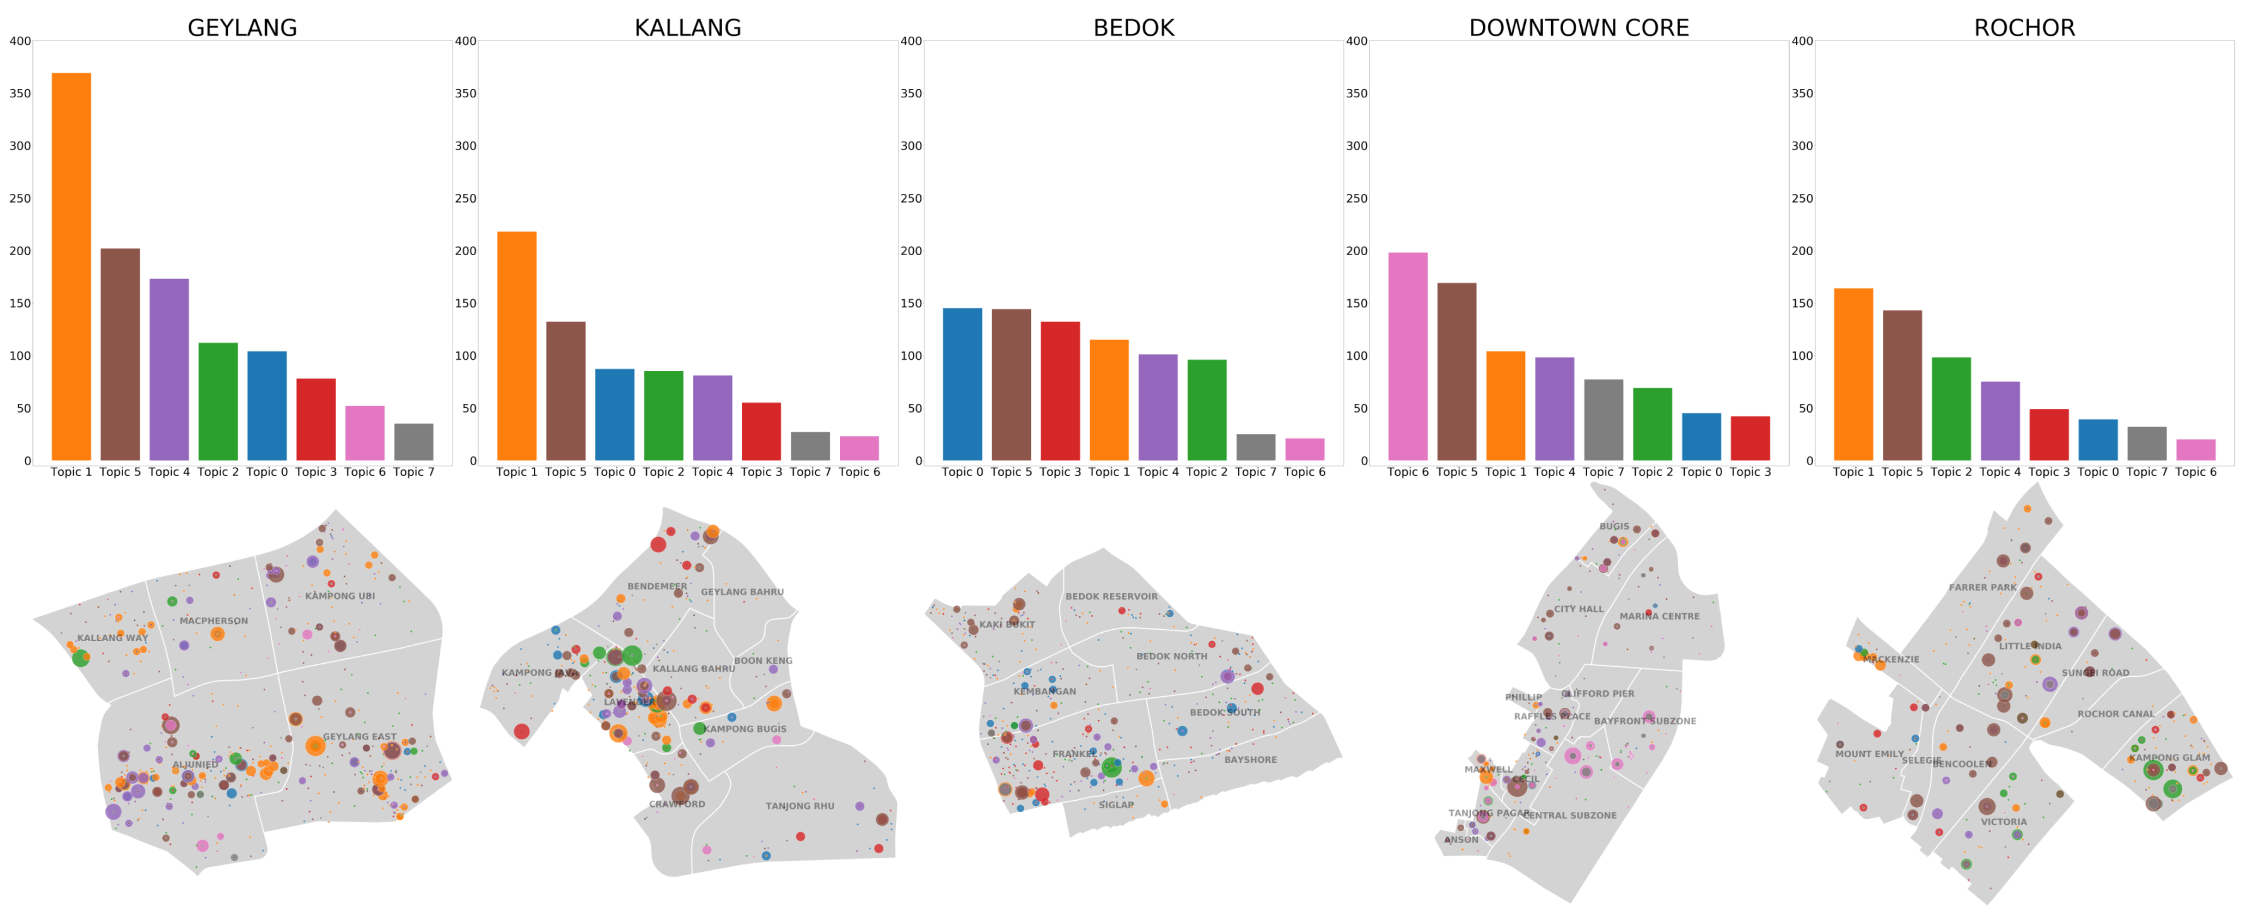 Small multiples of each planning area, broken down into
    subzones. The bar chart in the top row shows topic volumes, while the bottom row shows 
    where messages are concentrated within the planning area.